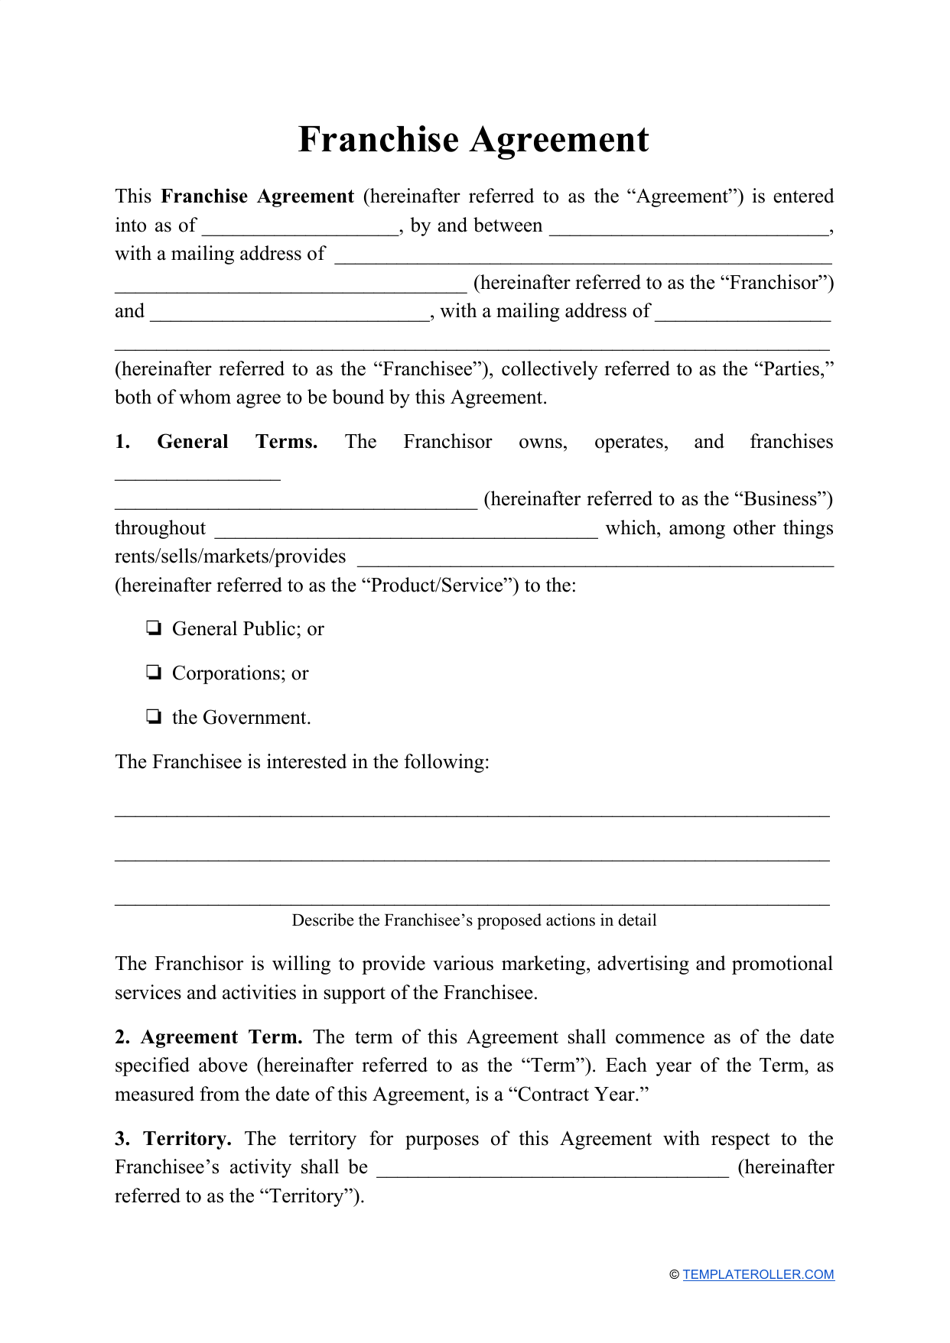 Franchise Agreement Template, Page 1